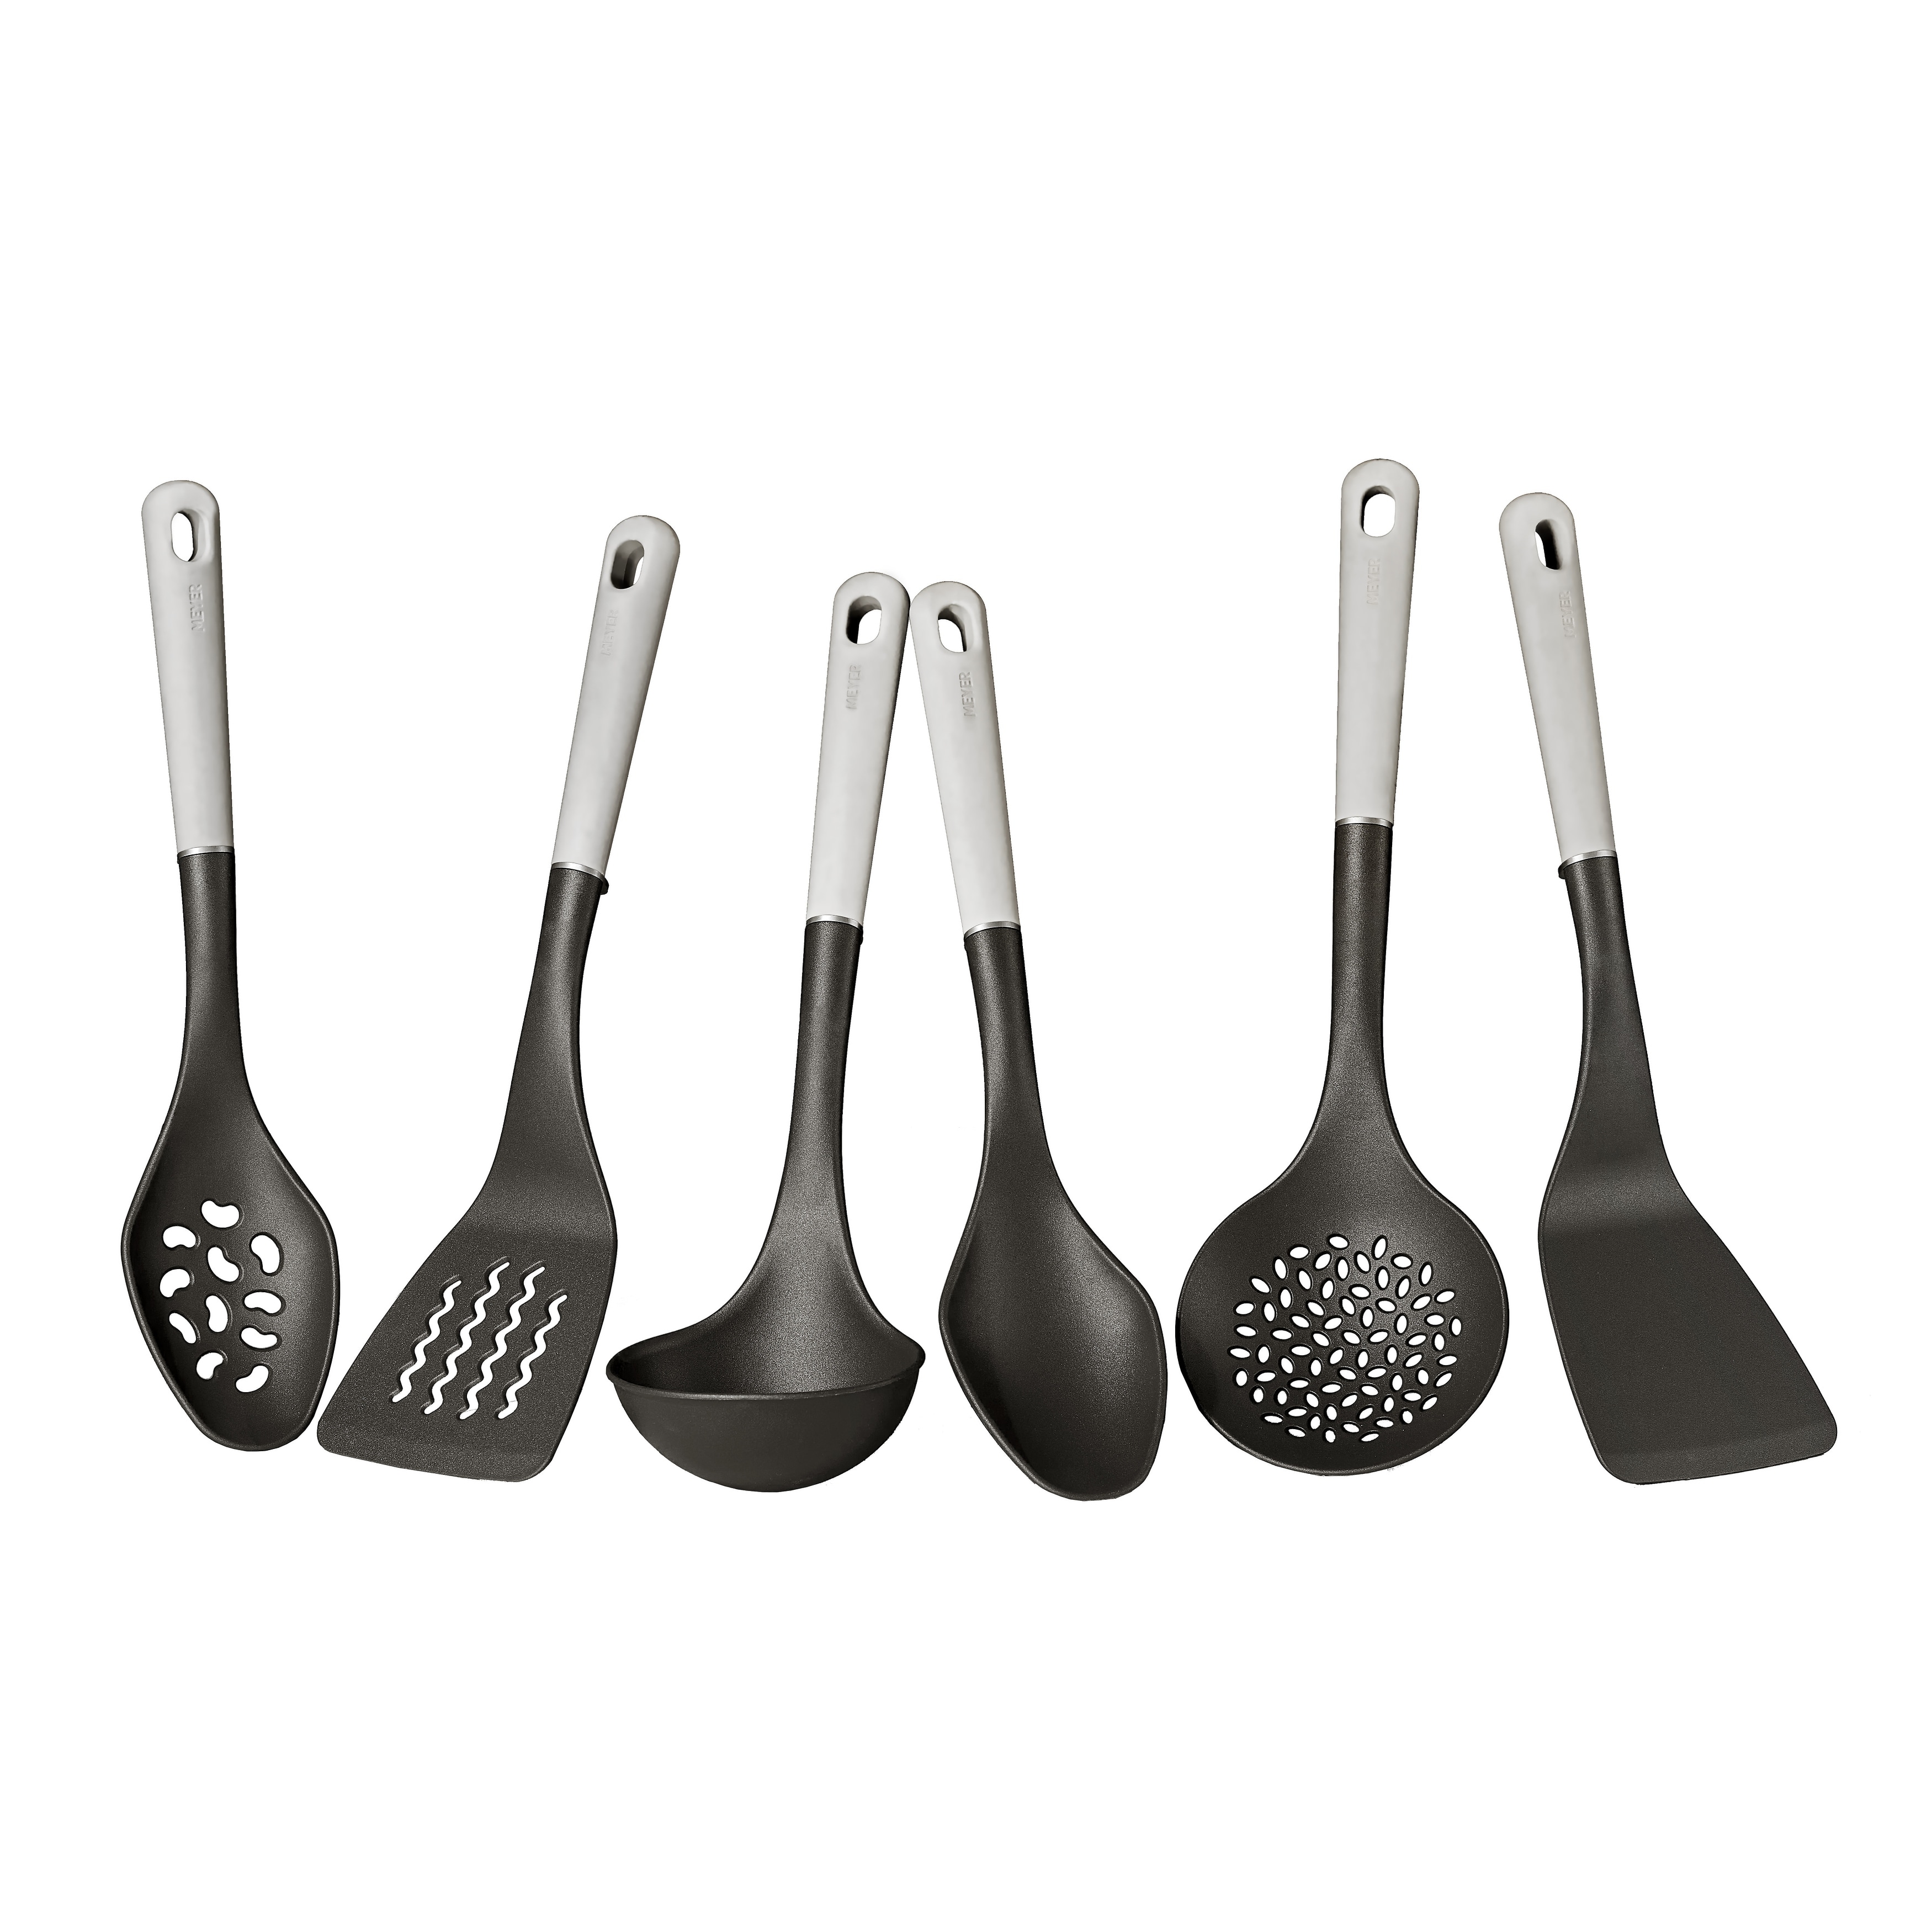 https://ak1.ostkcdn.com/images/products/is/images/direct/c75f0f5ec1877d4b39eda66a7ddfdbb77fb8a3d1/Meyer-Everyday-Nylon-Kitchen-Cooking-Utensil-and-Tool-Set%2C-6-Piece%2C-Black-with-Gray-Handles.jpg